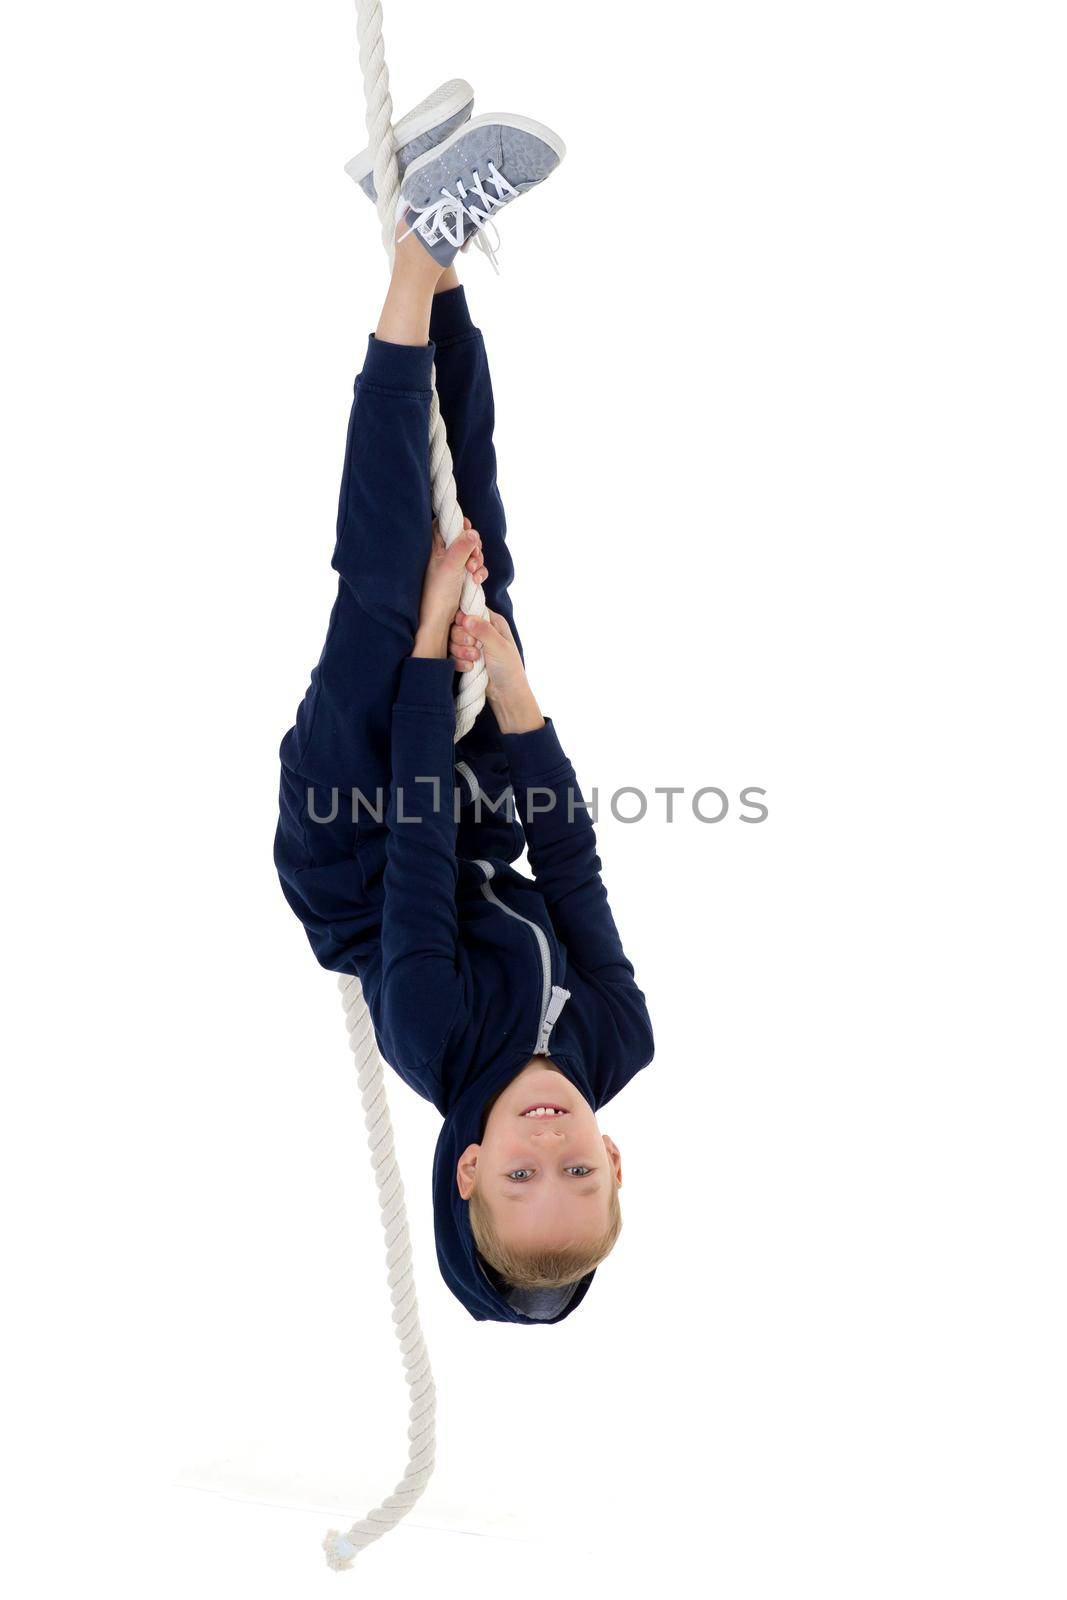 Active boy swing upside down on the rope. Kid playing and having fun doing activities. Happy child wearing casual clothes isolated on white background. Happy childhood, active lifestyle concept